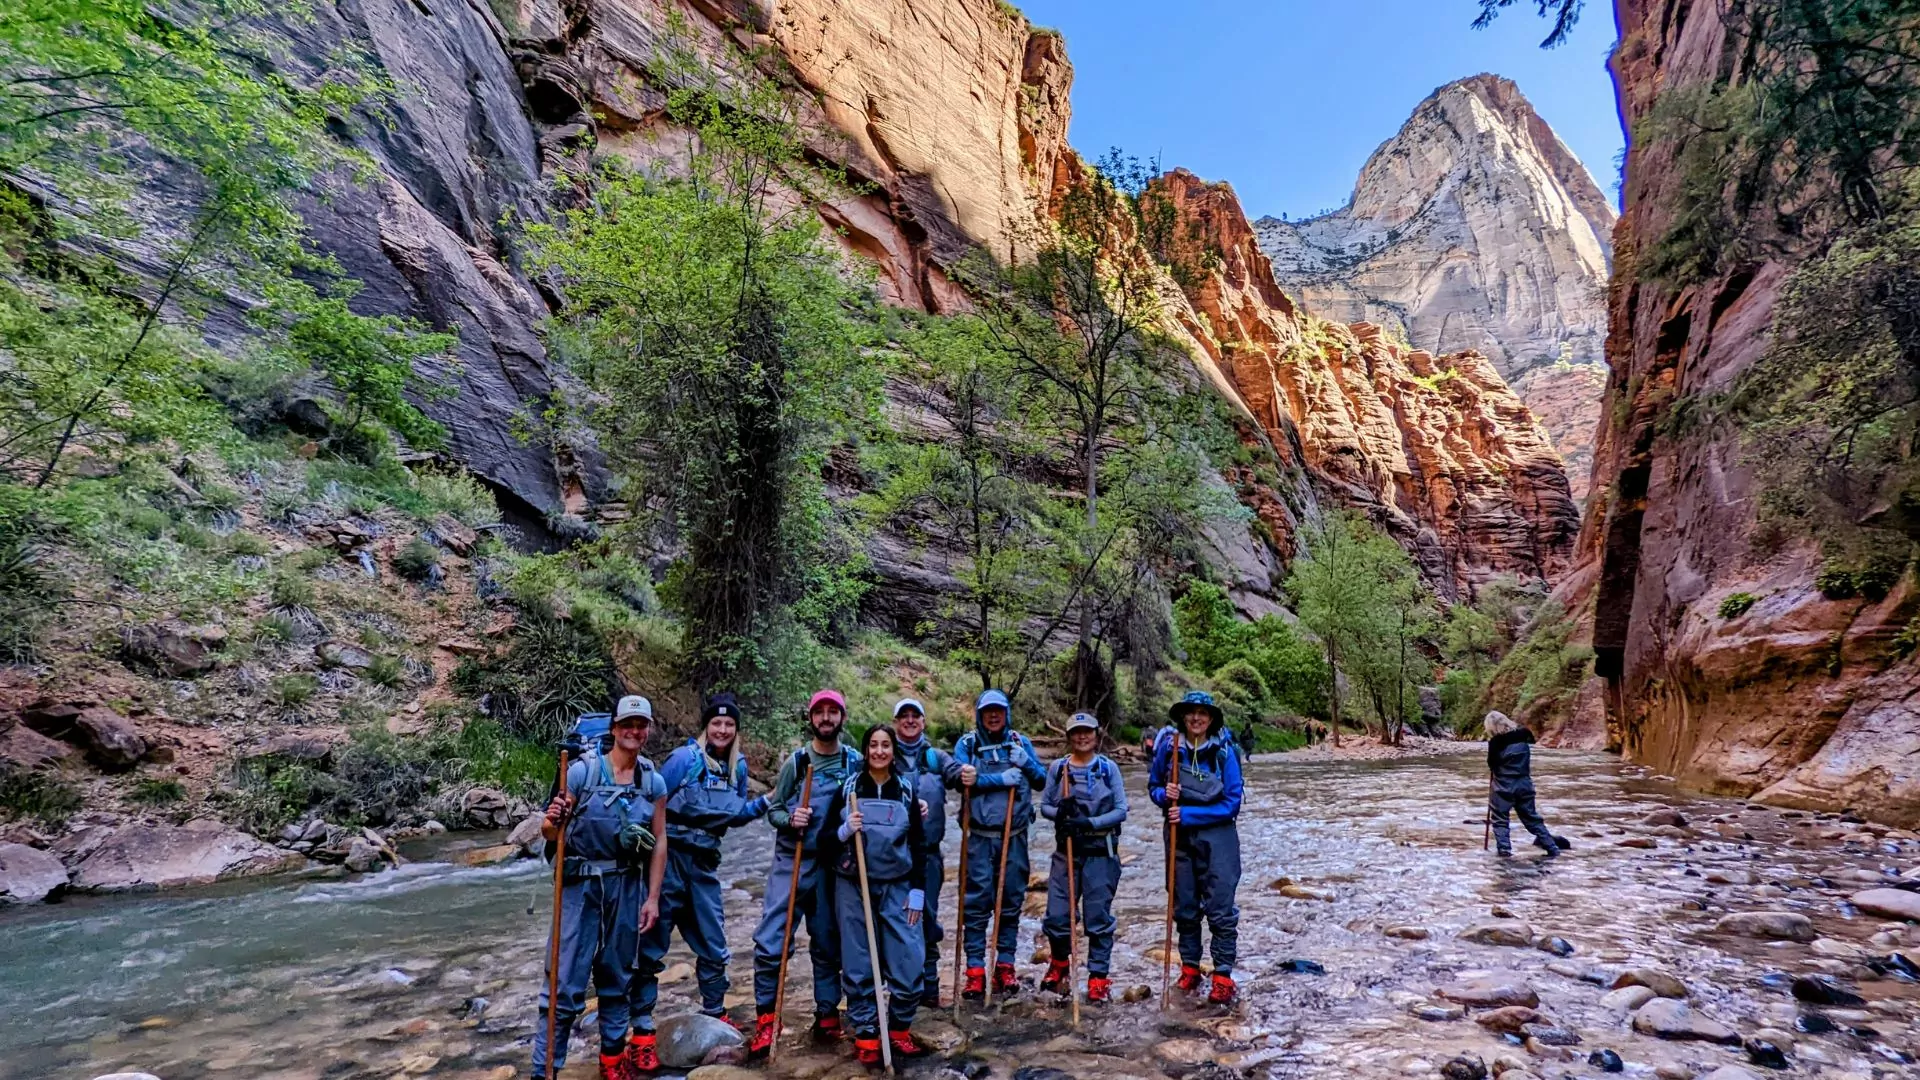 Hikers wearing waders stand ready to begin the Zion Narrows hike